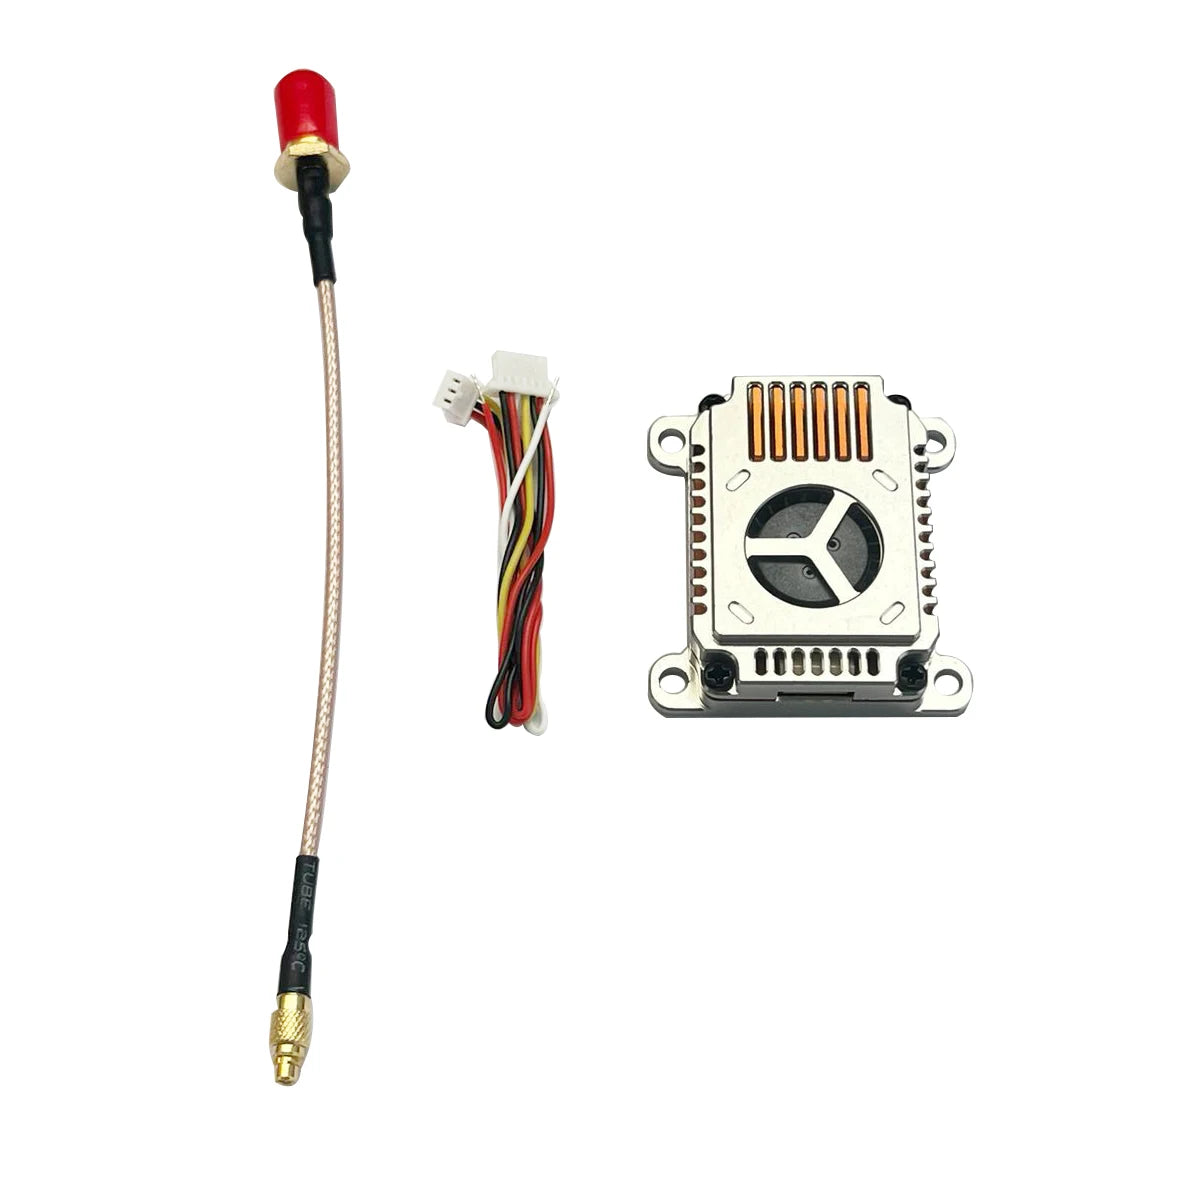 RCMOY 5.8G 3W 48CH VTX - Video Transmitter 25mW/1000mW/2000mW/3000mW adjustable For Long Rang FPV Racing Drone  rc toy part